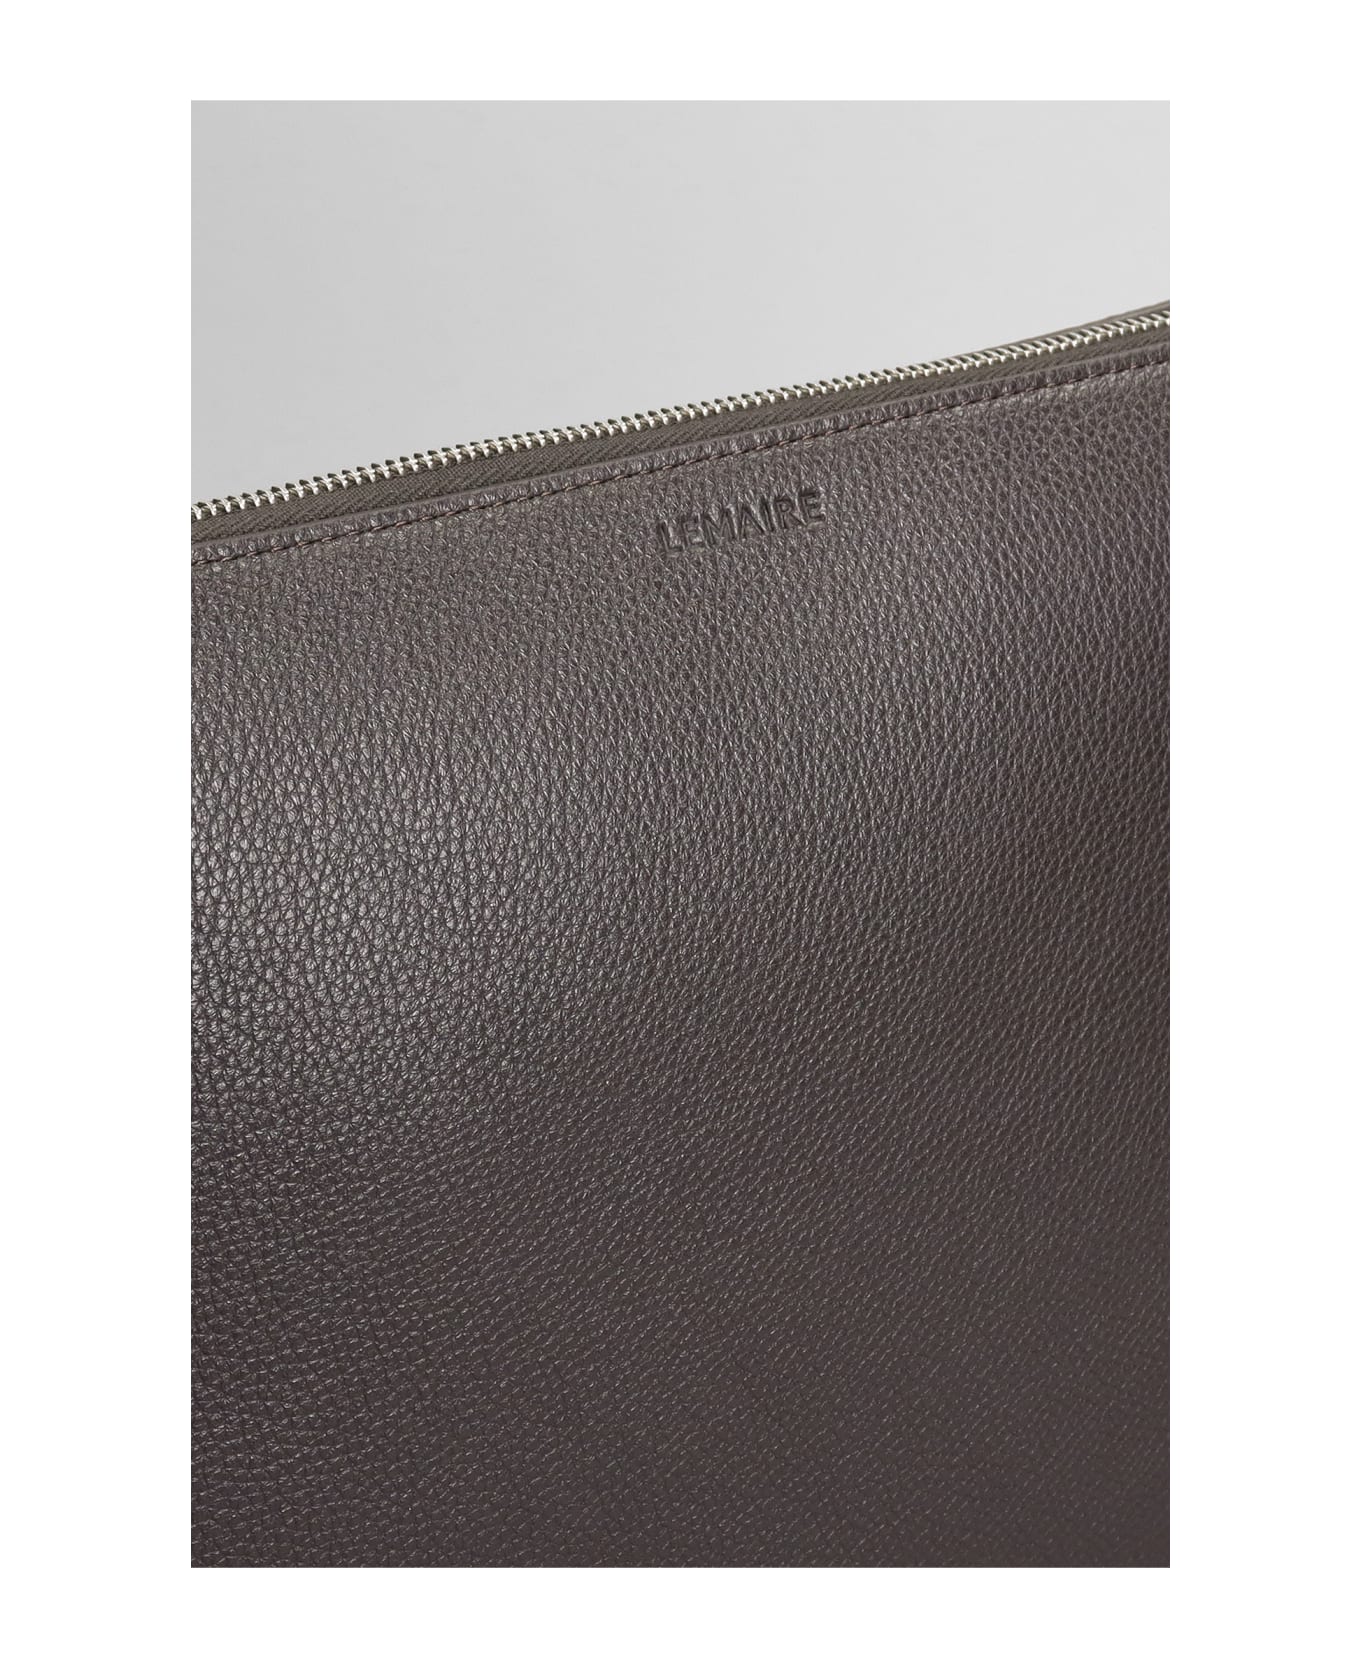 Lemaire Document Holder Clutch In Brown Leather - brown